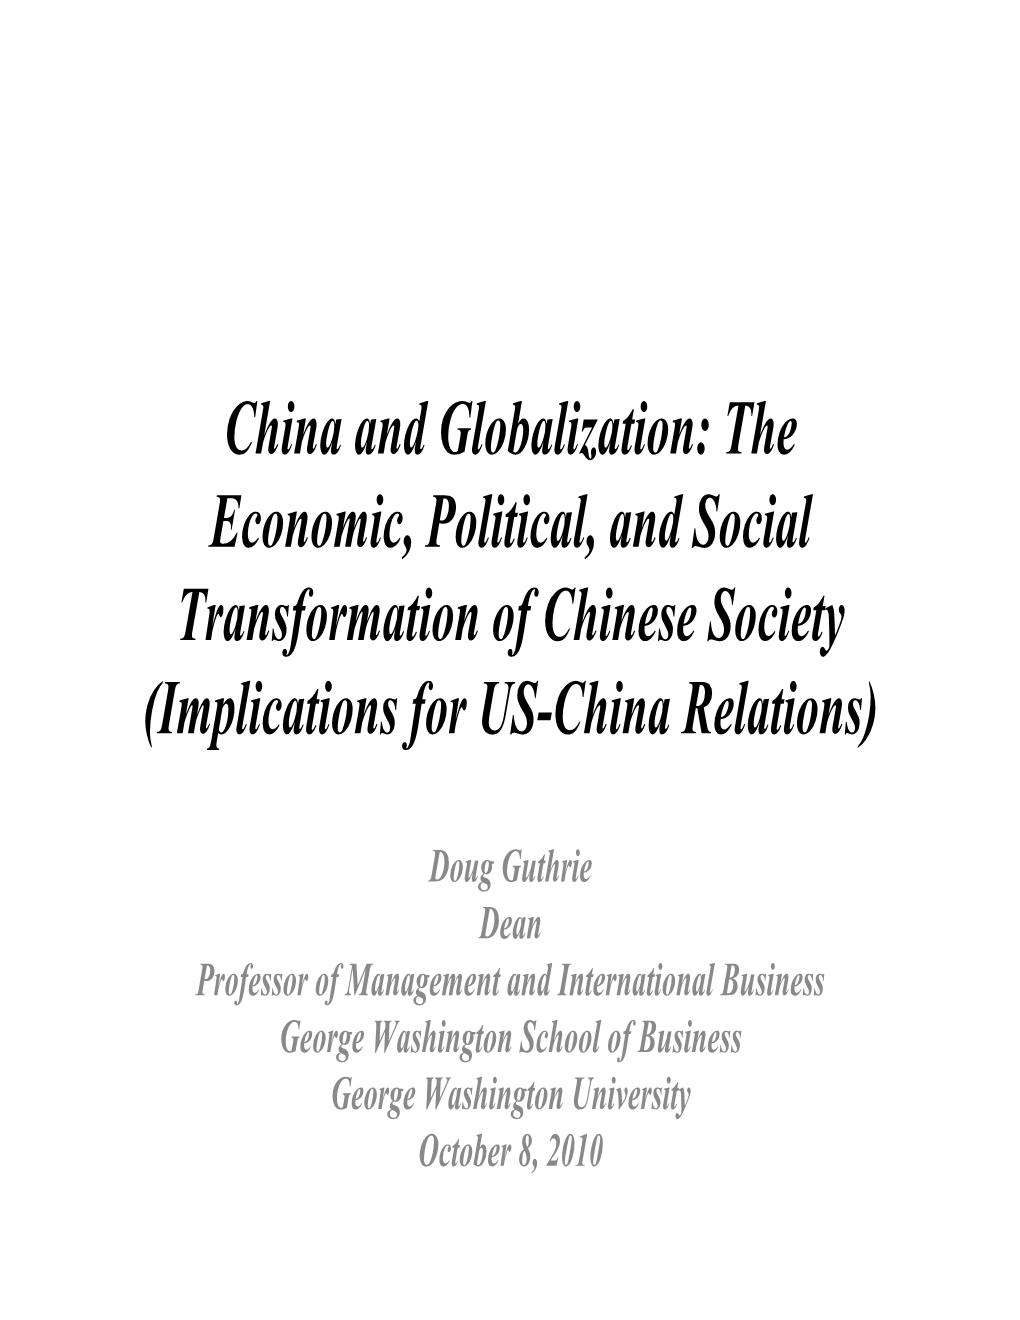 China and Globalization: the Economic, Political, and Social Transformation of Chinese Society (Implications for US-China Relations)